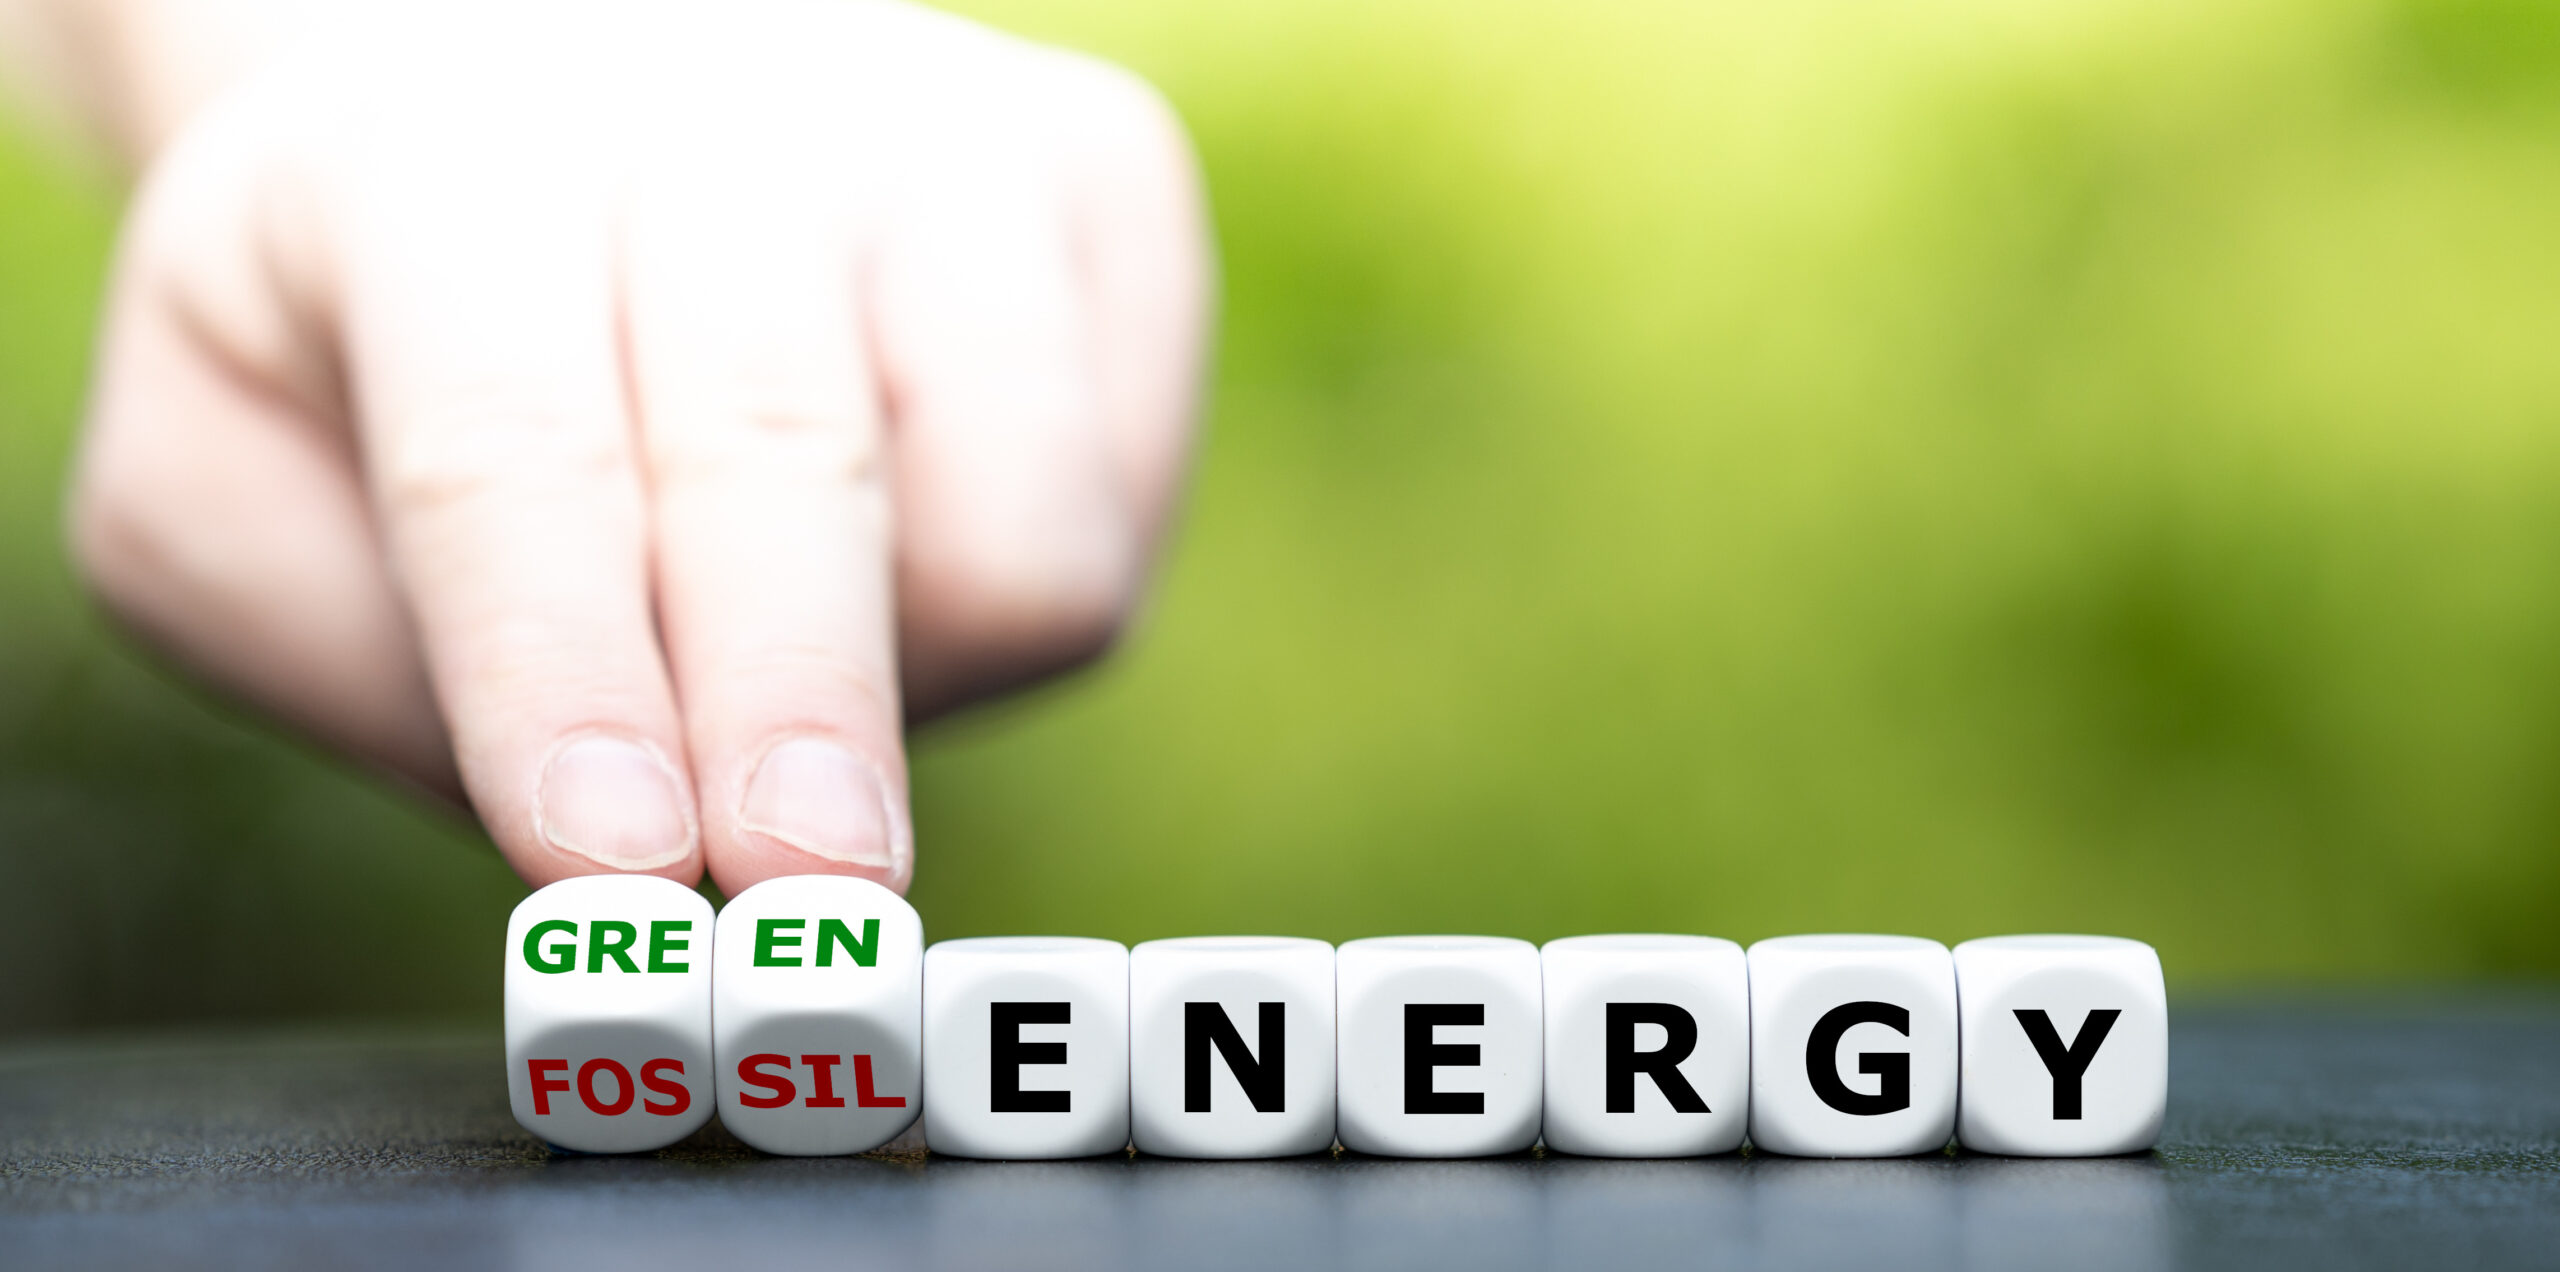 Hand turns dice and changes the expression “fossil energy” to “g